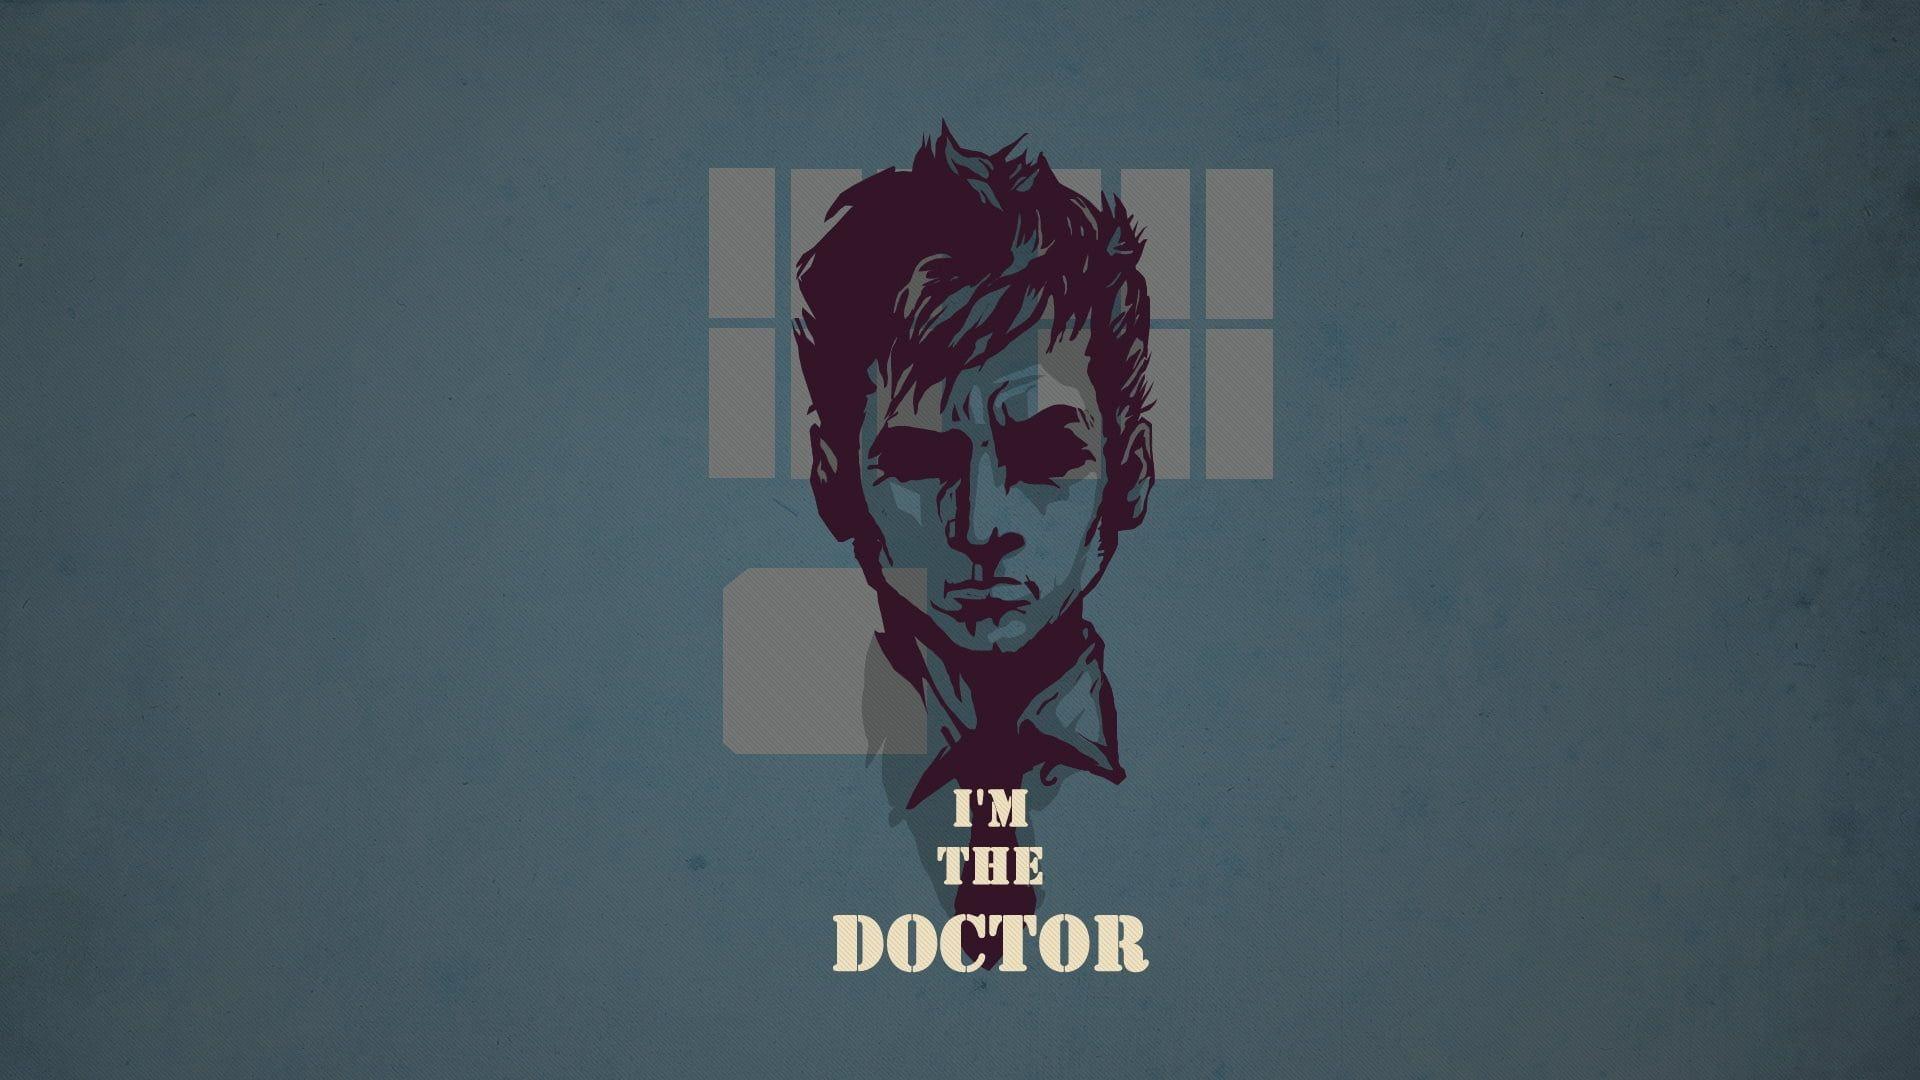 I'm The Doctor poster HD wallpaper